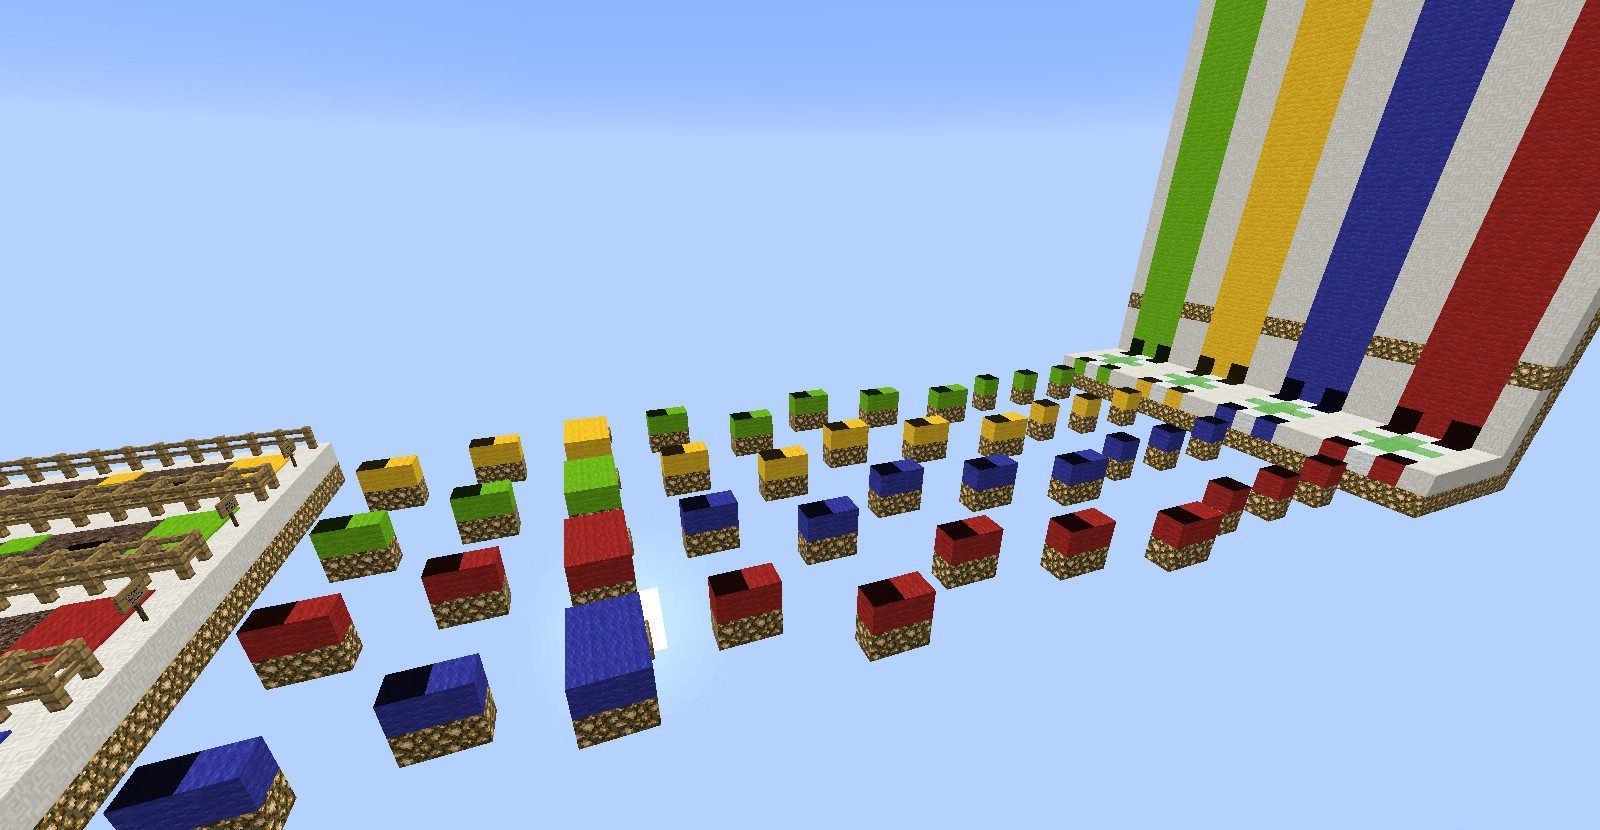 Lucky Block Race Map for MCPE Game for Android - Download